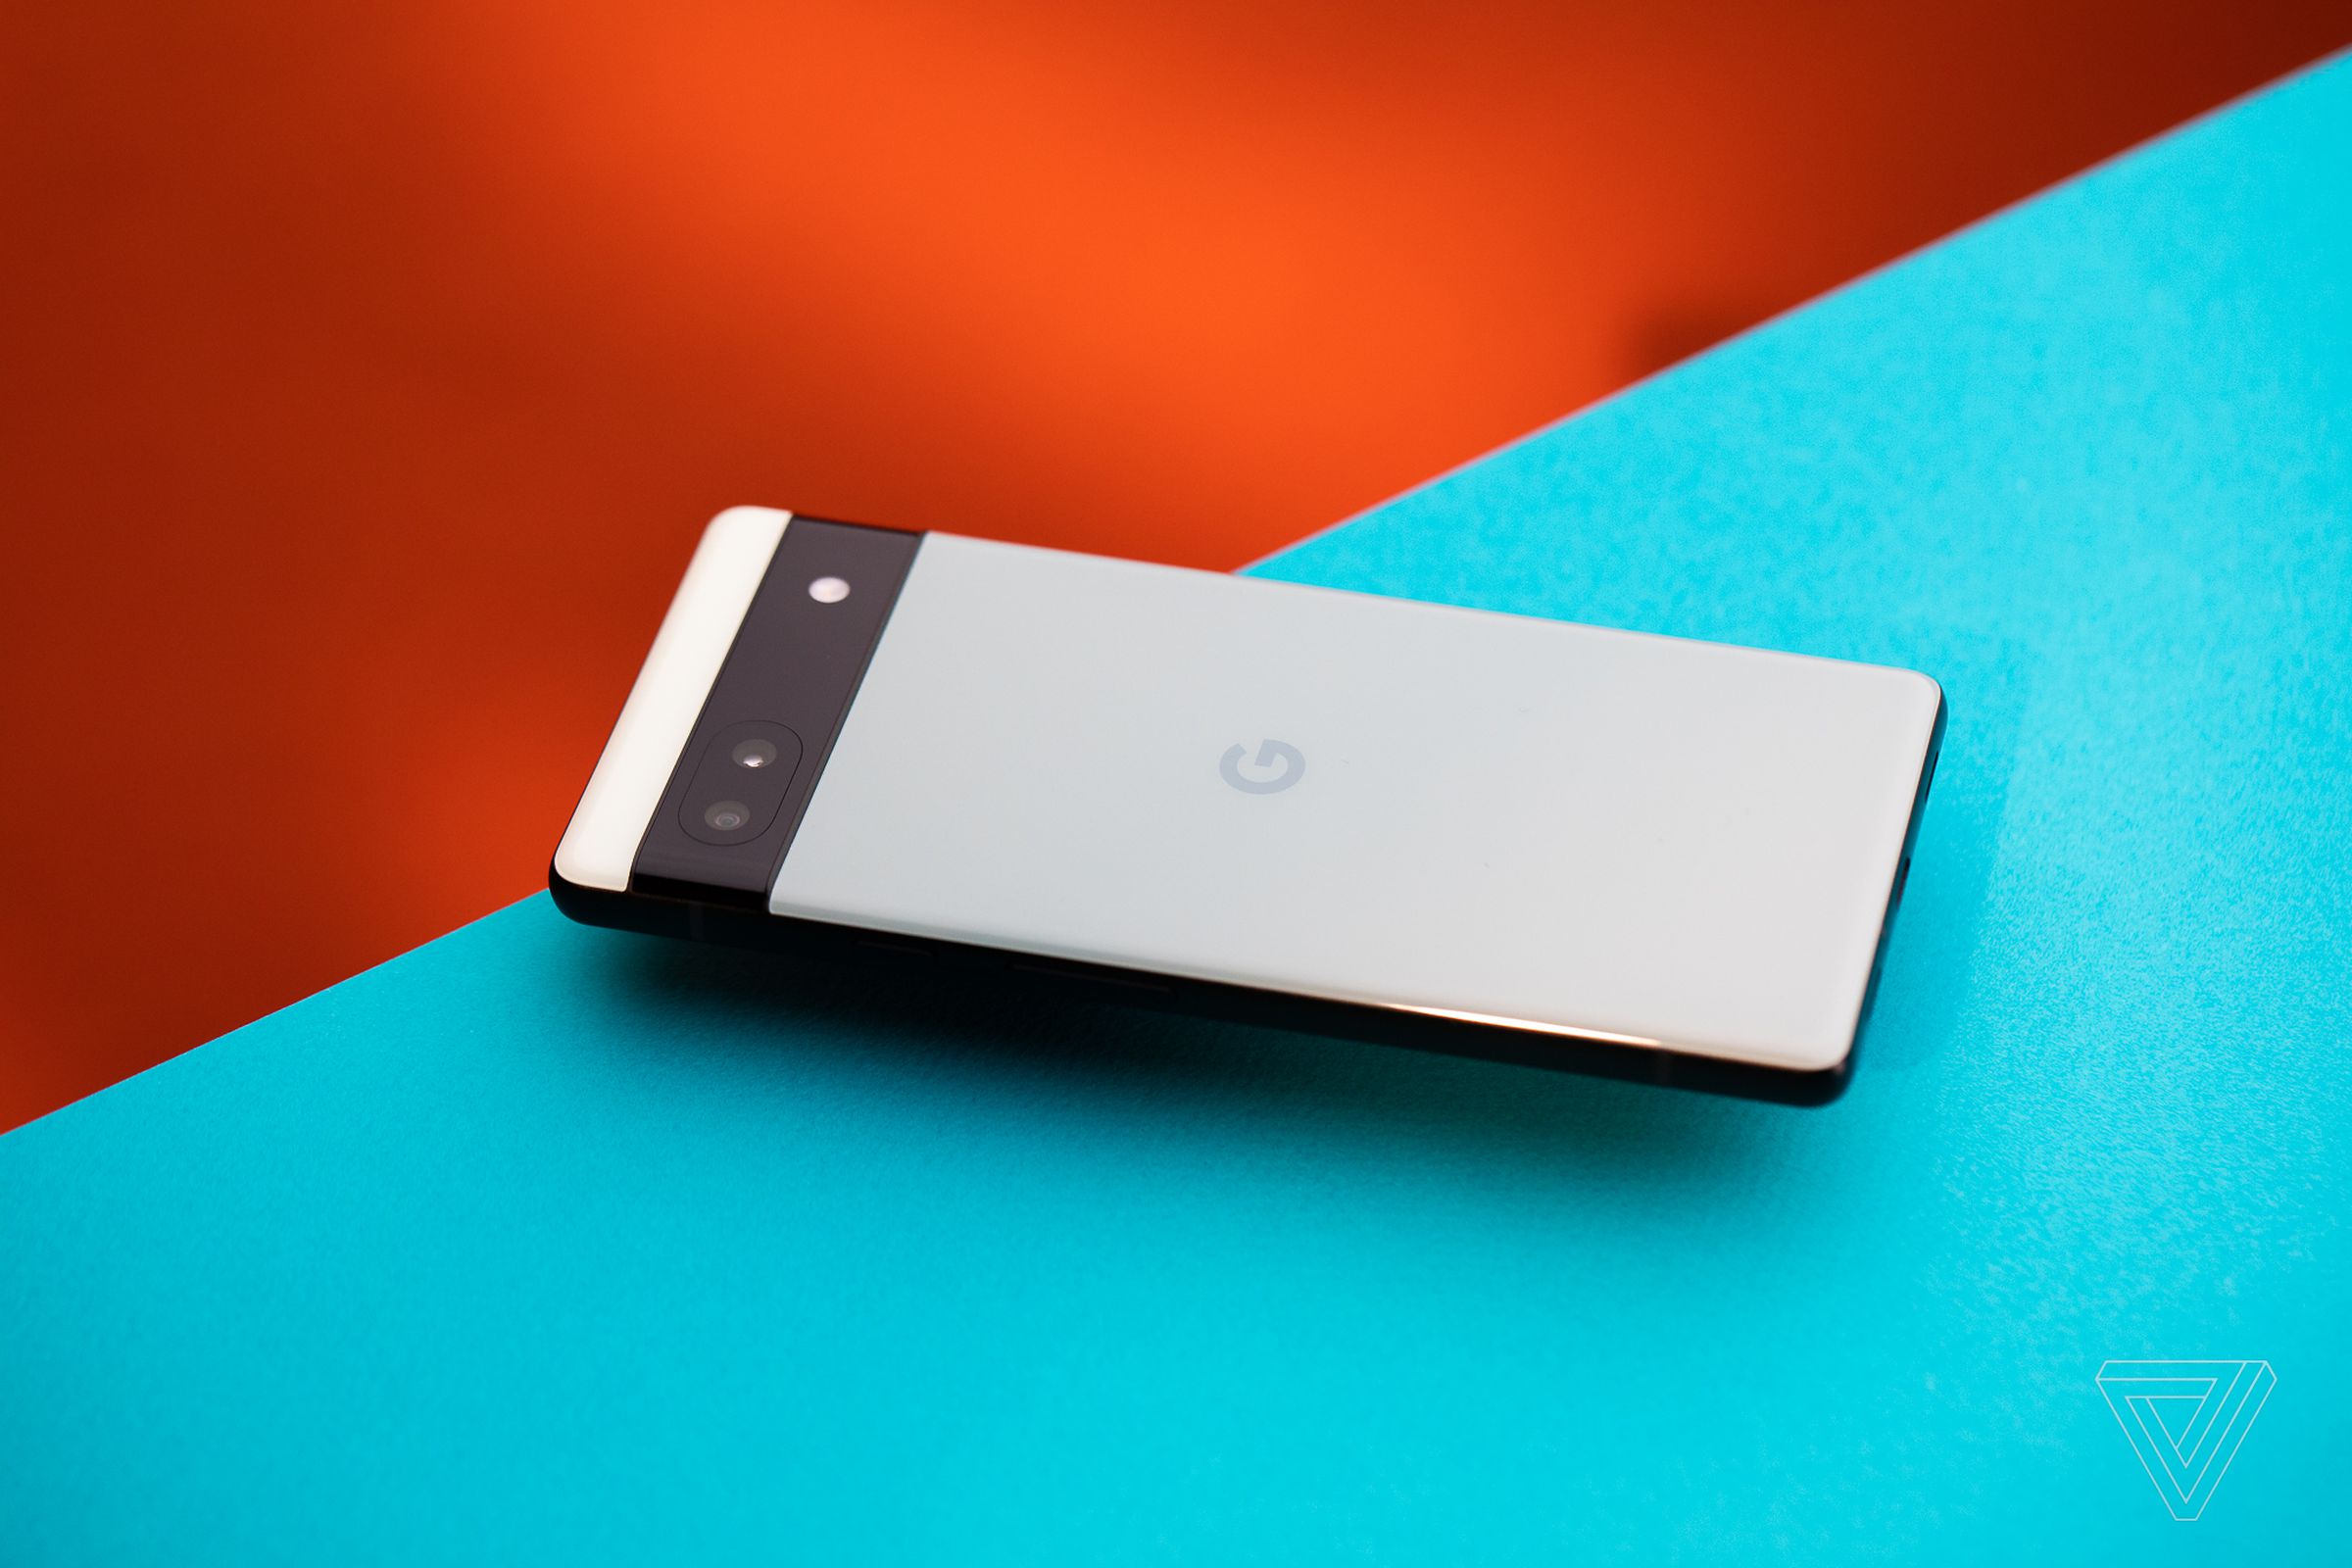 Google’s Pixel 6A sits face down on a blue and red backdrop. This shot reveals the phone’s backside, including its cameras, and Google’s G logo.